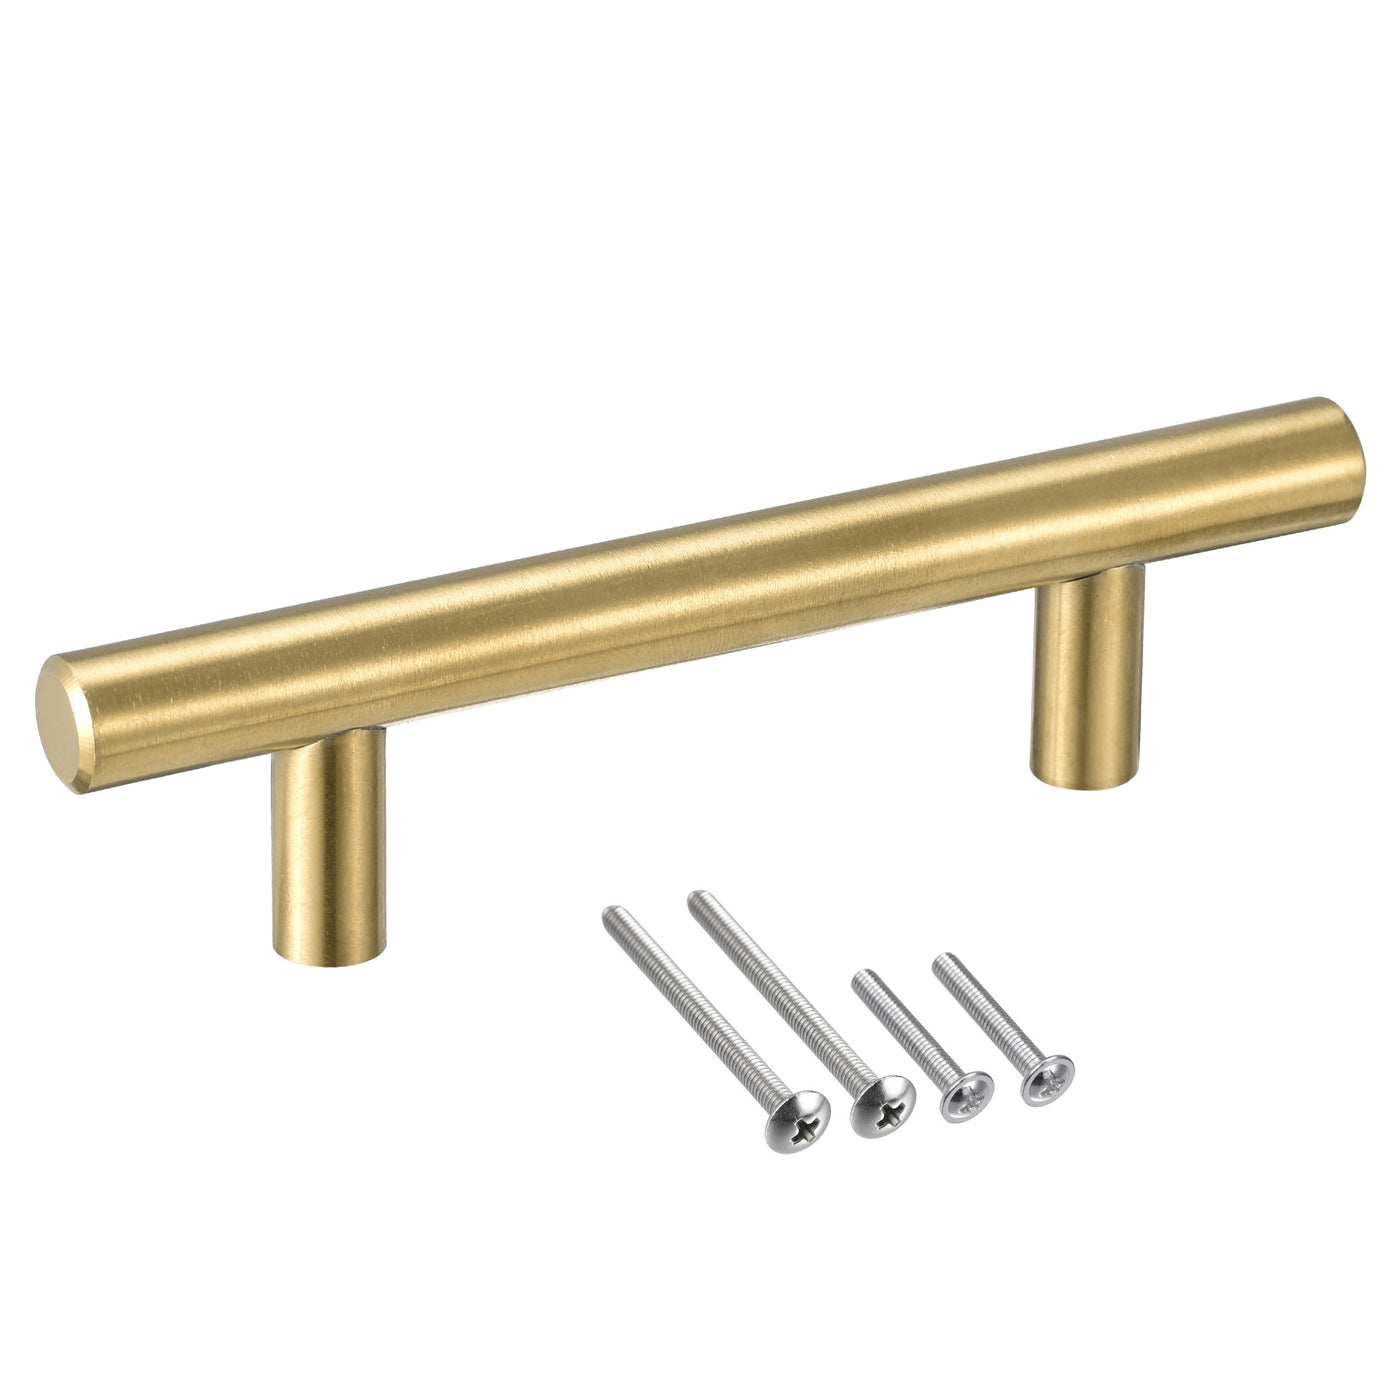 uxcell Uxcell T Bar Pull Handle, 5"(127mm) Length 12mm Dia Stainless Steel Cabinet Pulls 3"(76mm) Hole Center Distance, Gold Tone, 6pcs